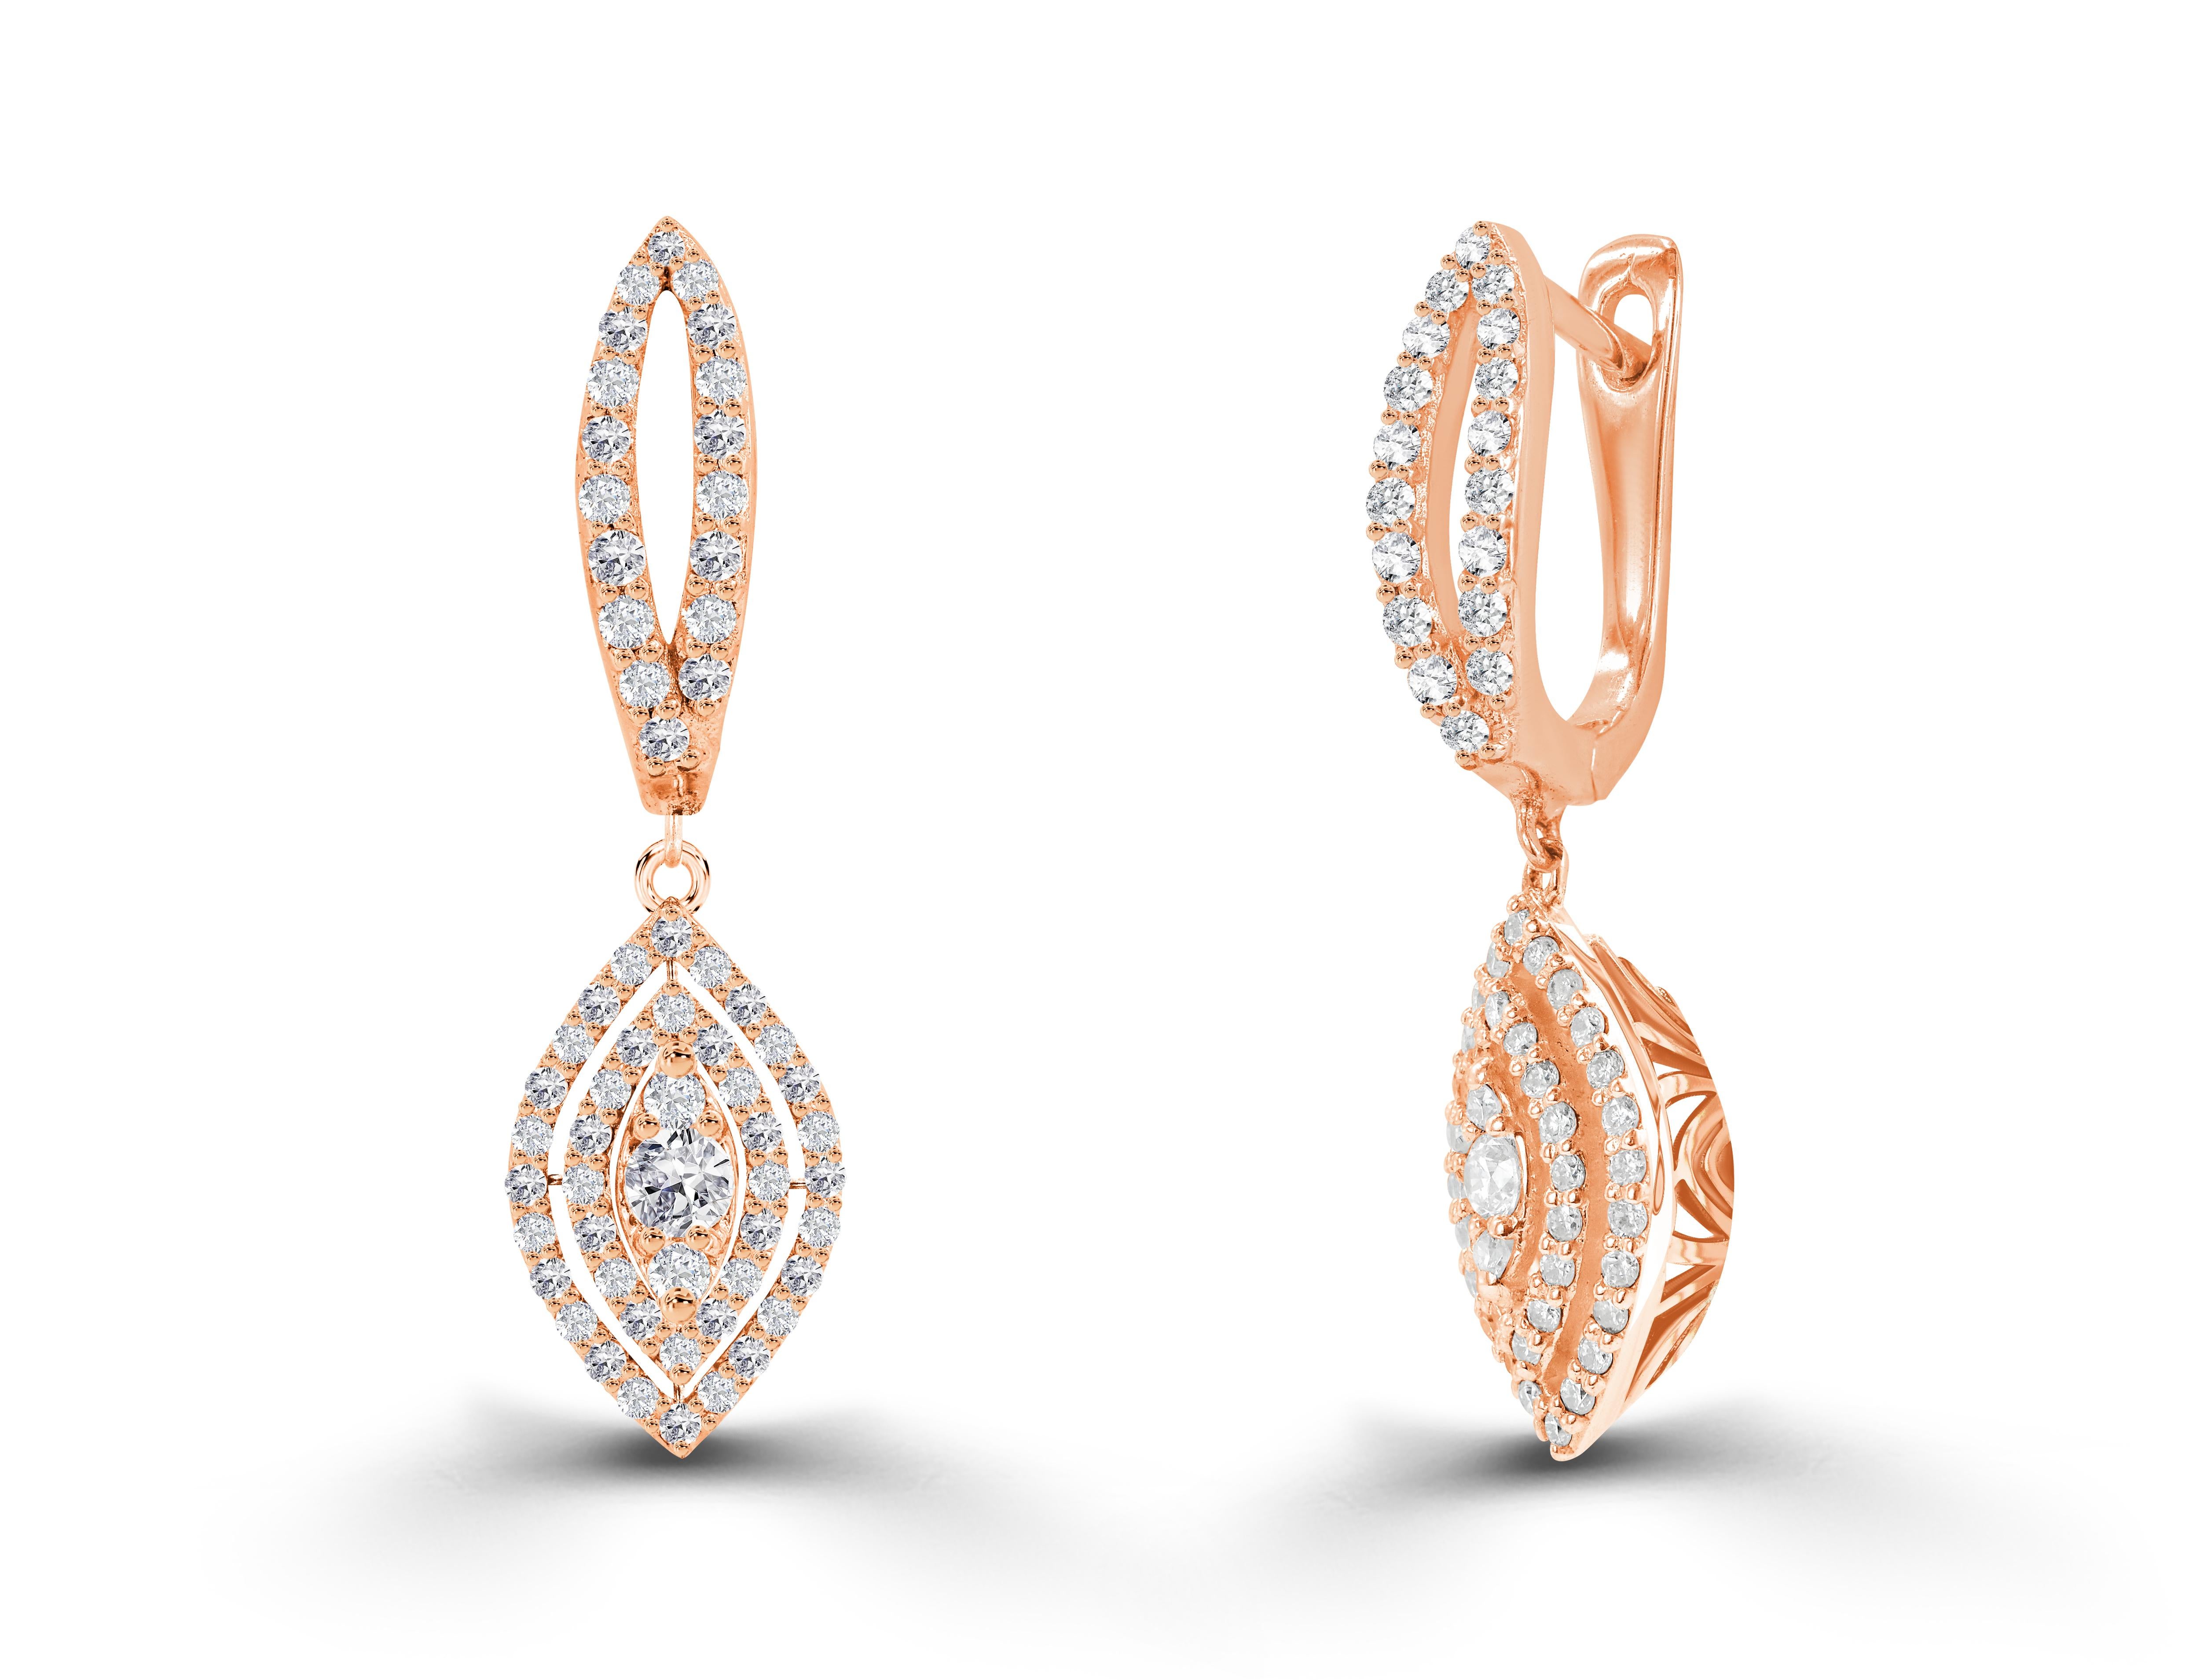 0.70 Ct Diamond Marquise shaped Drop Earrings in 14K Gold, Round Brilliant cut diamond earrings, Natural Diamond Earrings, Cluster dangle earrings, Heavy End Earrings.

Jewels By Tarry presents to you a beautiful Earring collection with natural